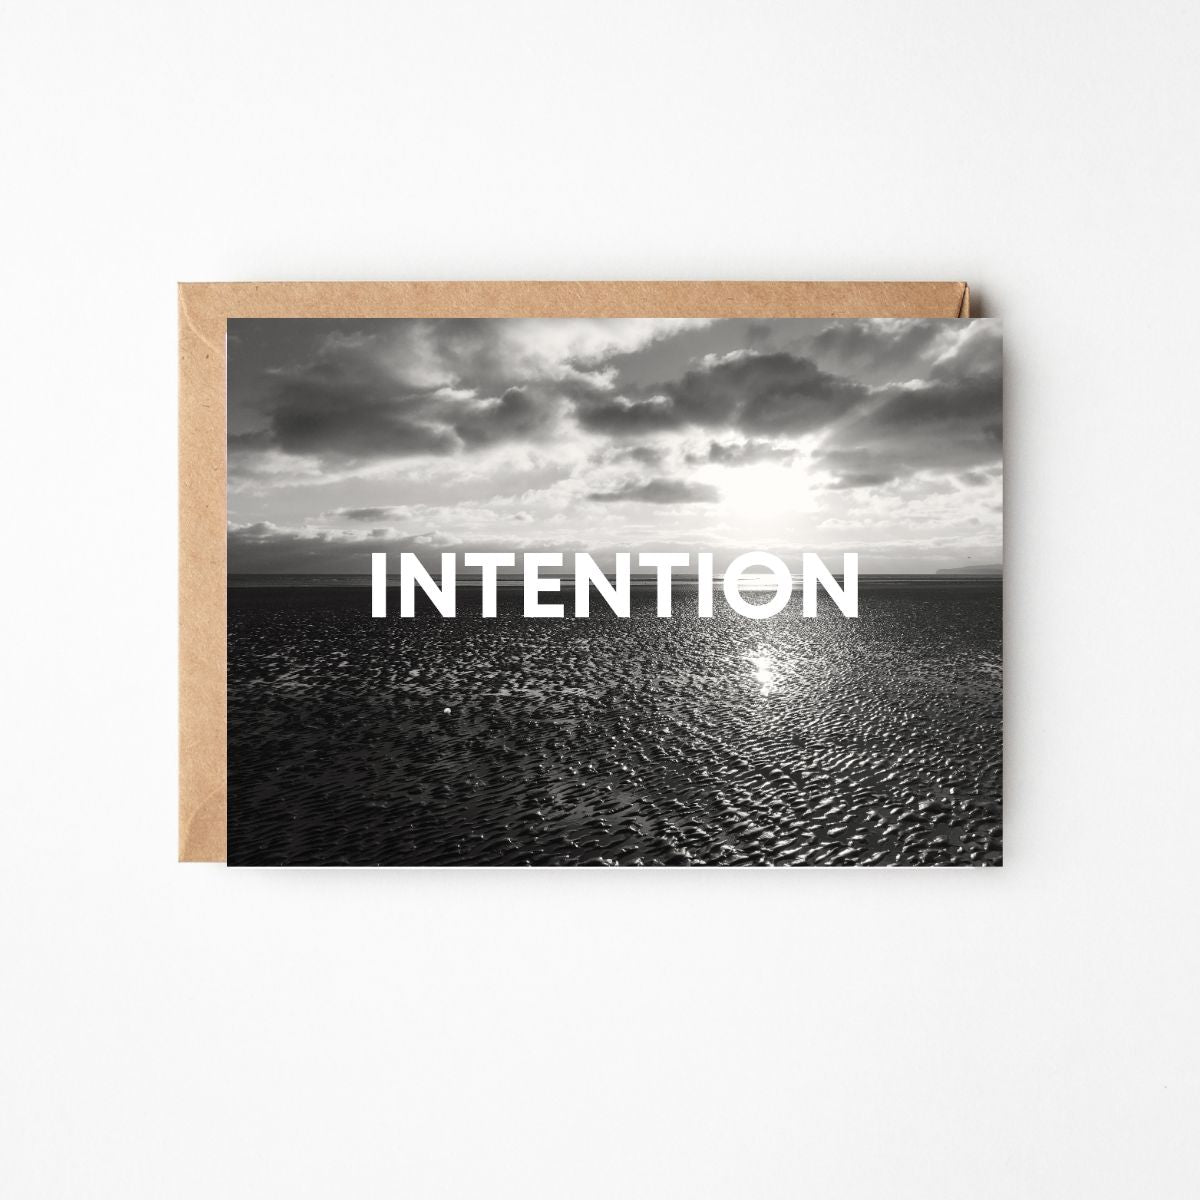 INTENTION Card